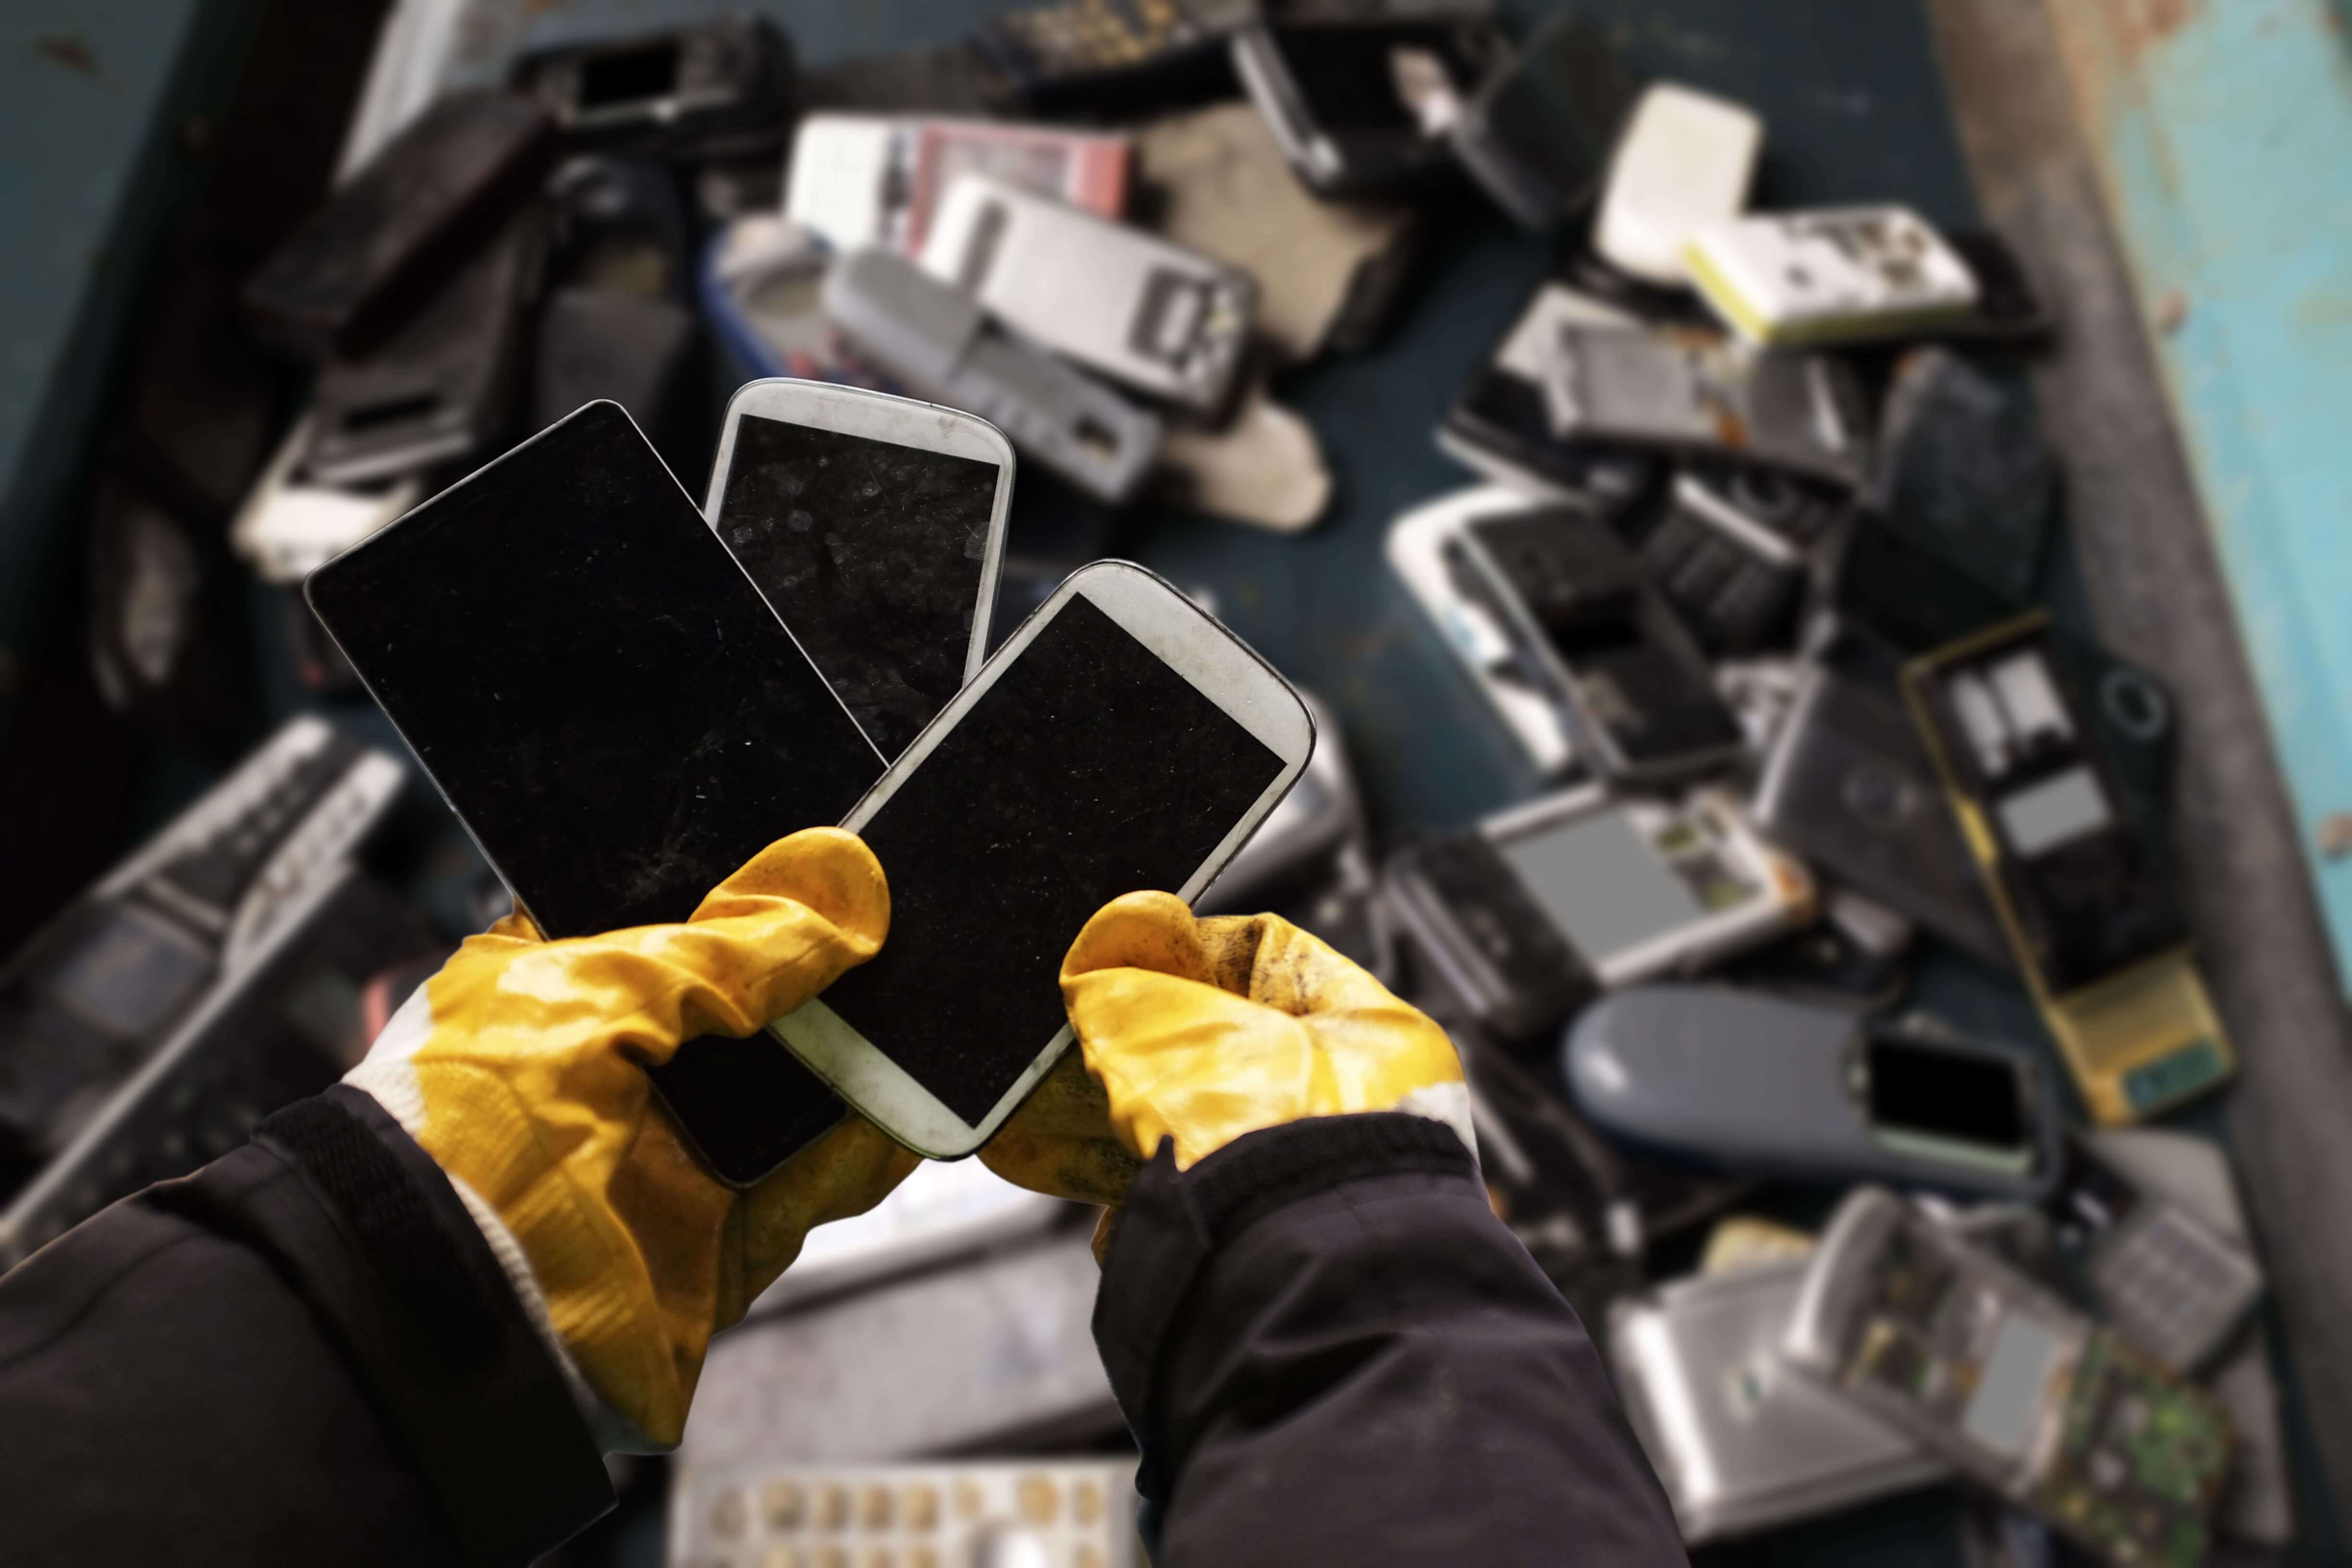 Old mobile phones in a recycling bin